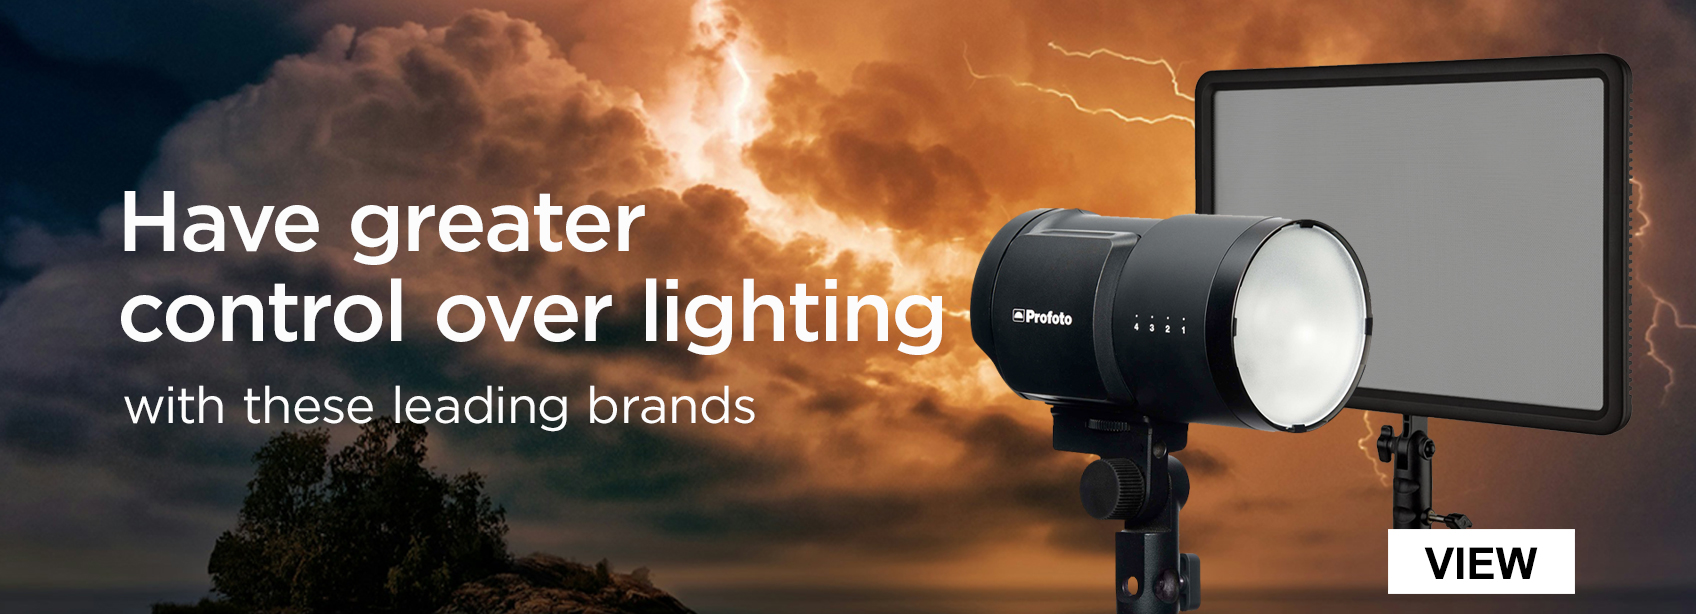 Have greater control over lighting with these leading brands